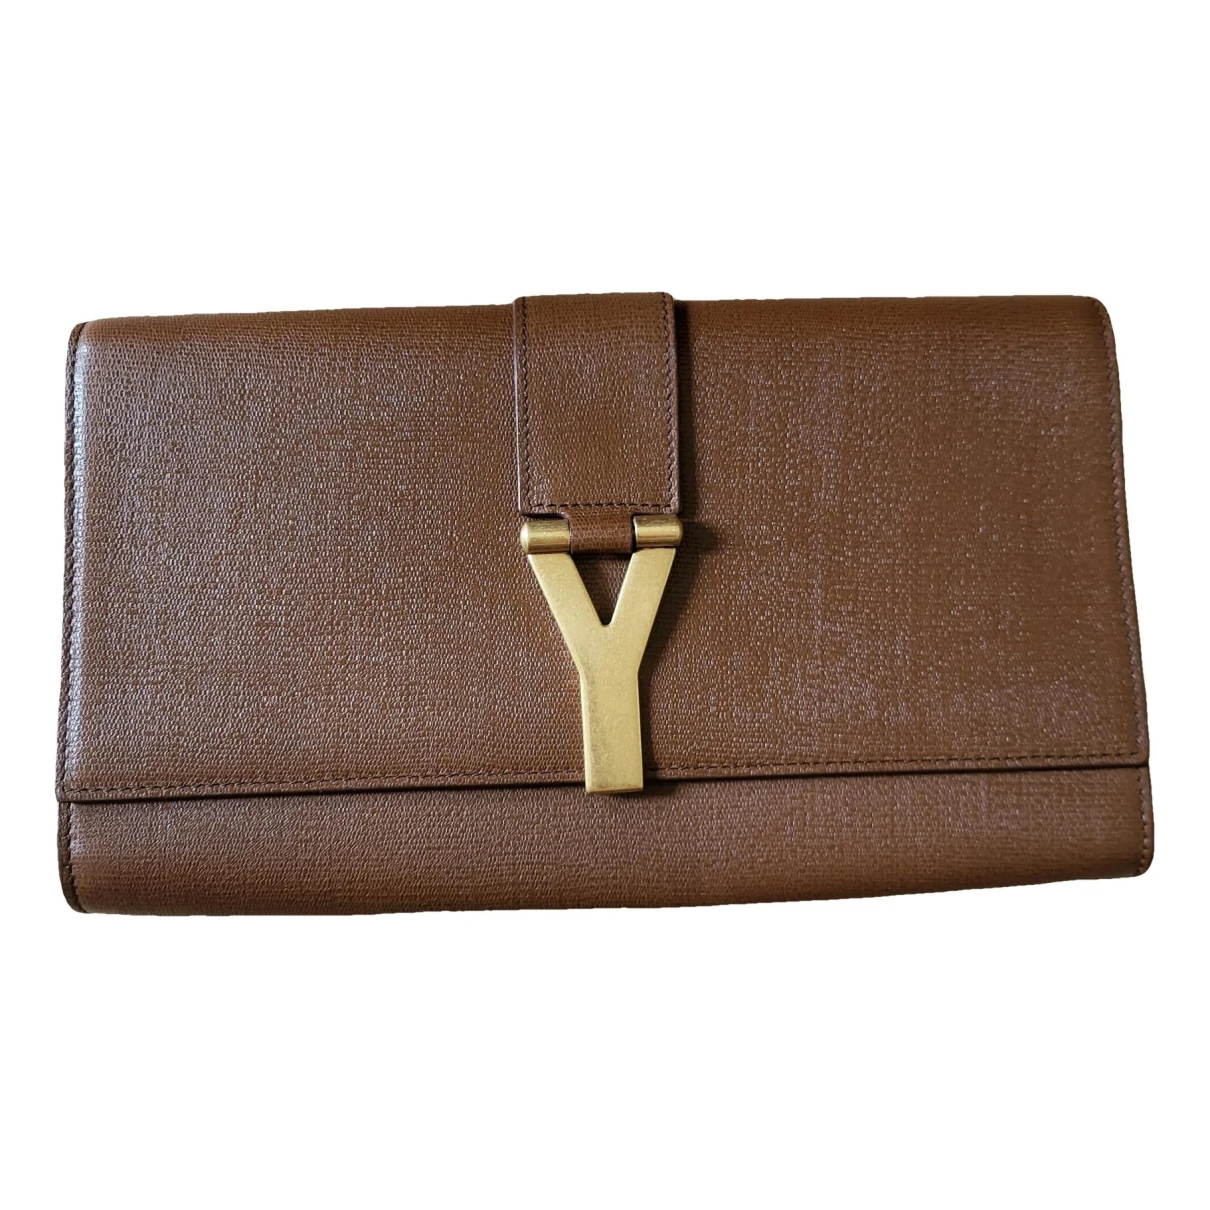 Pre-owned Saint Laurent Chyc Leather Clutch Bag In Brown